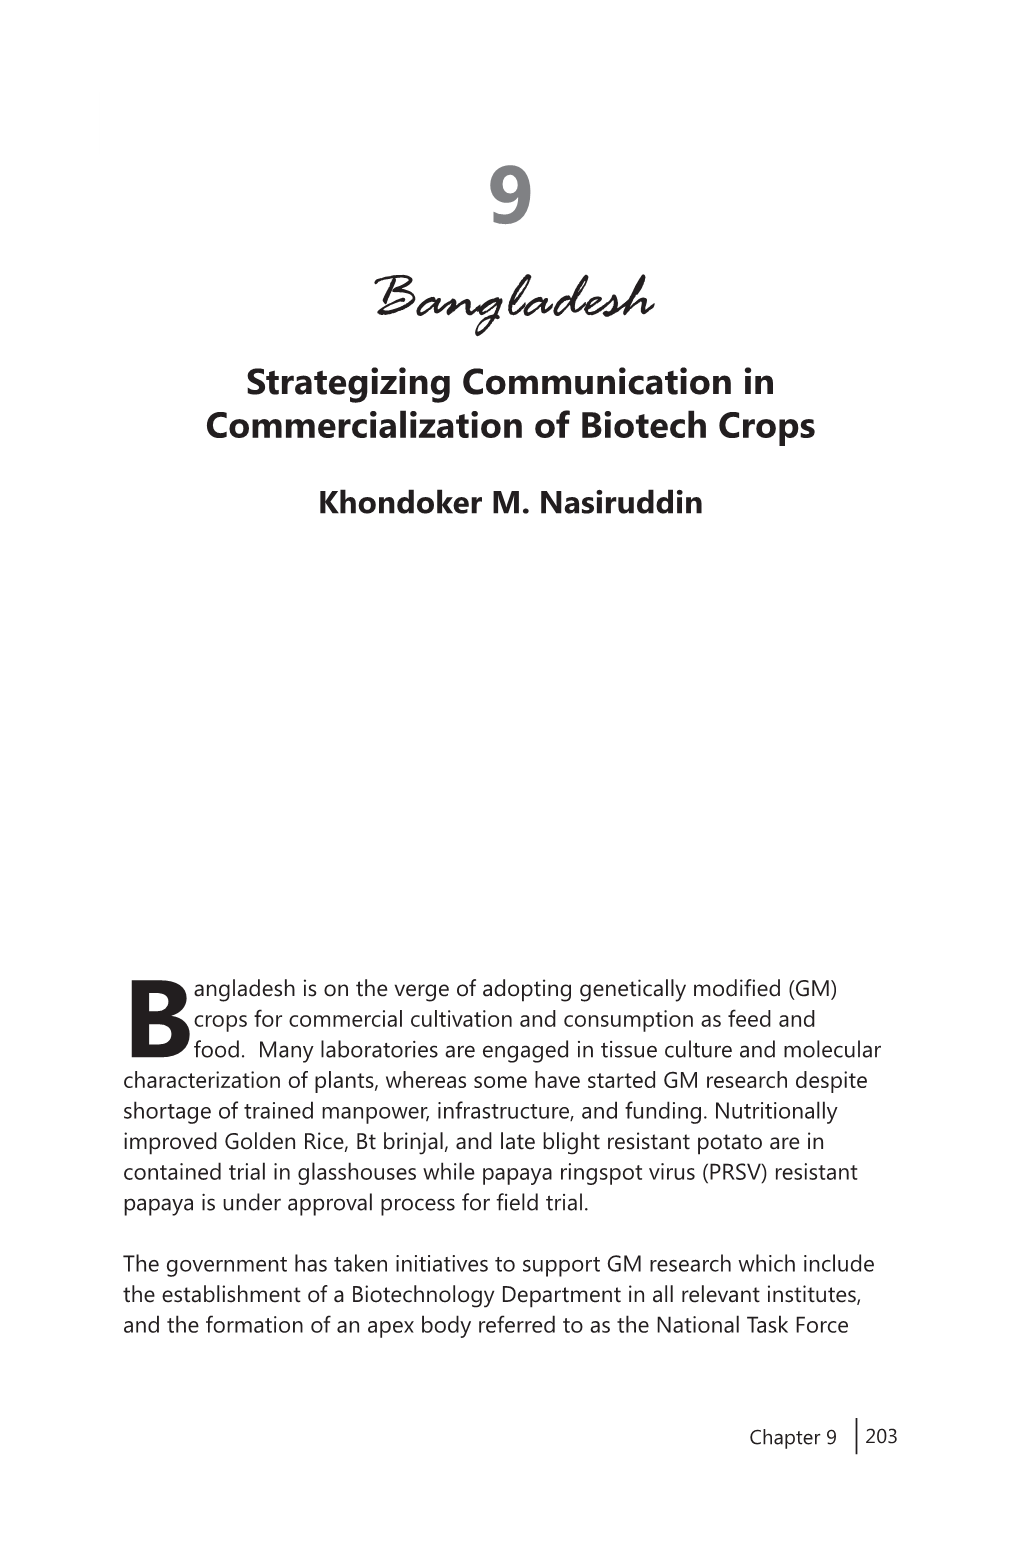 Bangladesh Strategizing Communication in Commercialization of Biotech Crops